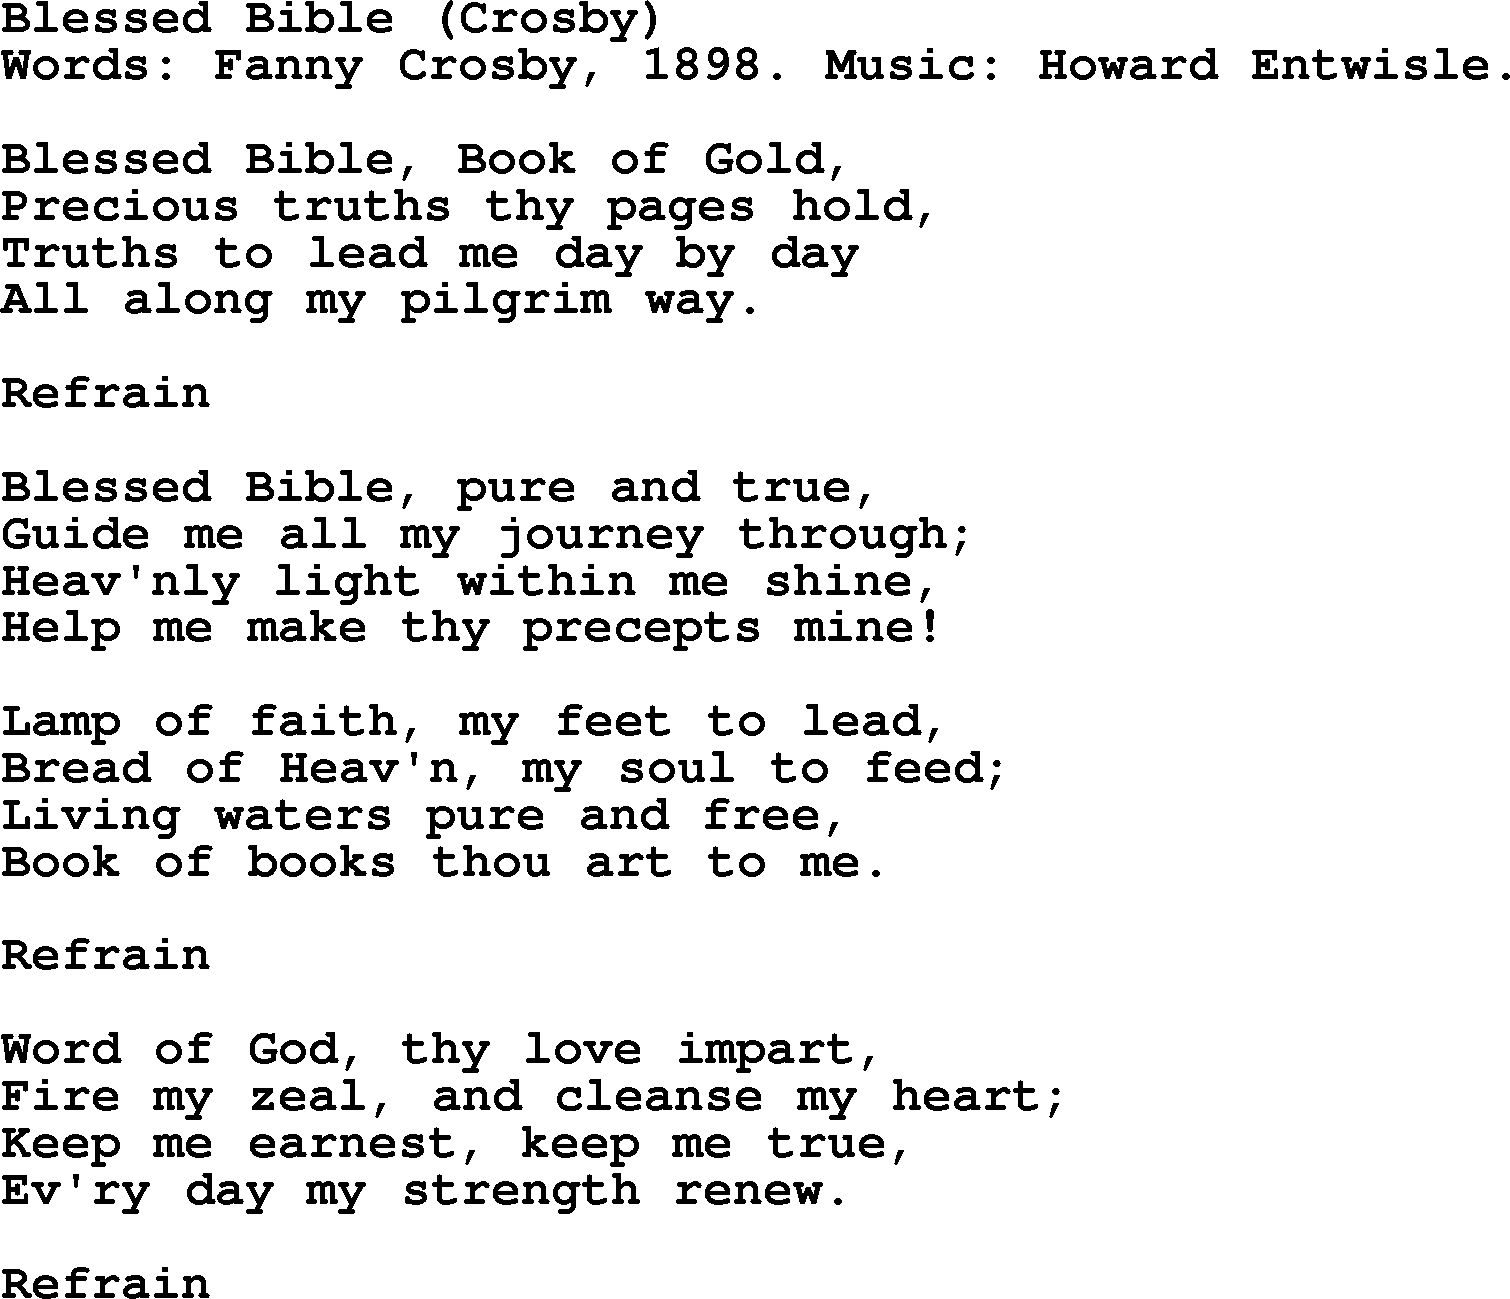 Fanny Crosby song: Blessed Bible, lyrics